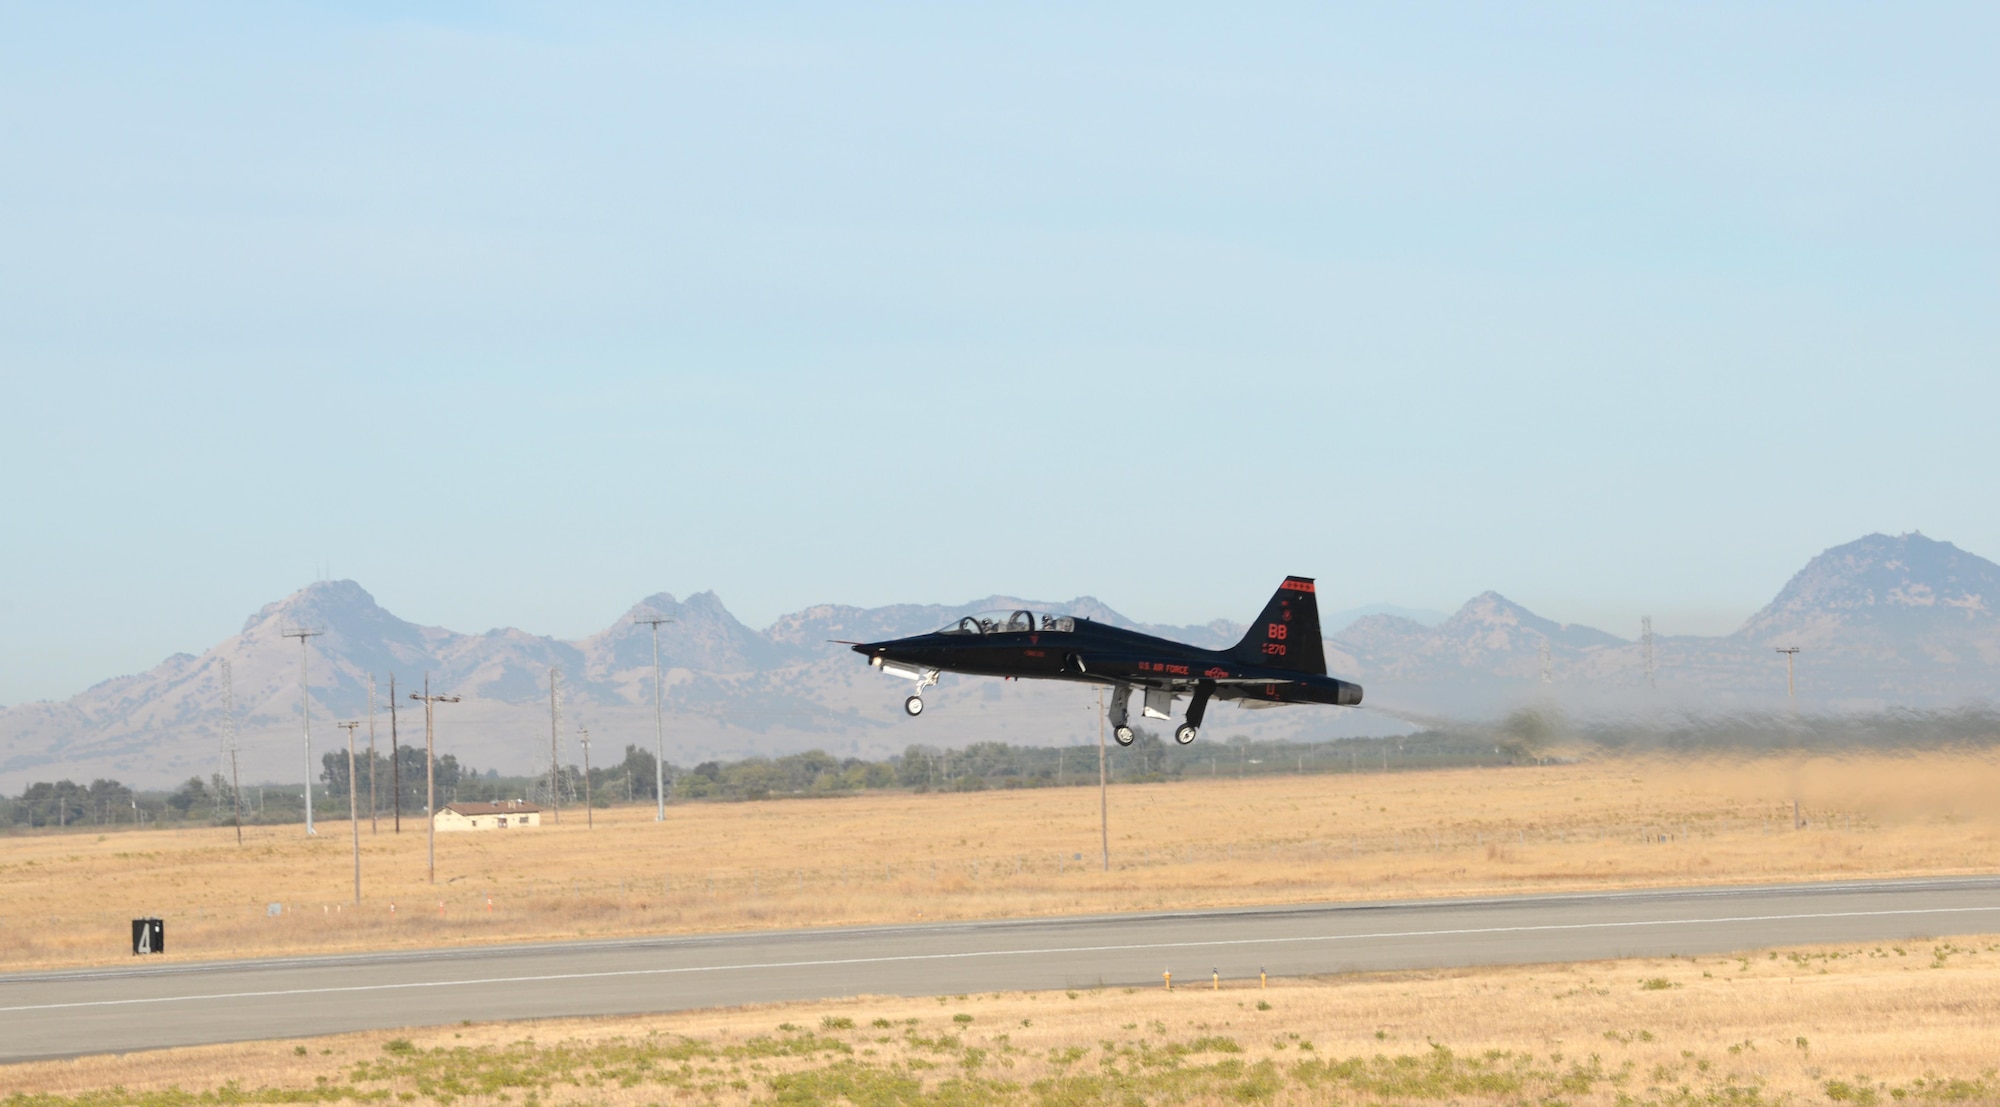 A T-38 Talon takes off Sept. 23, 2016, at Beale Air Force Base. The T-38 flew in a formation to honor the pilot who died during a U-2 Dragon Lady incident that took place near the Sutter Buttes Sept. 20, 2016. Today's flights signified the U-2 returning to normal flying operations locally. (U.S. Air Force photo/Airman Tristan D. Viglianco)